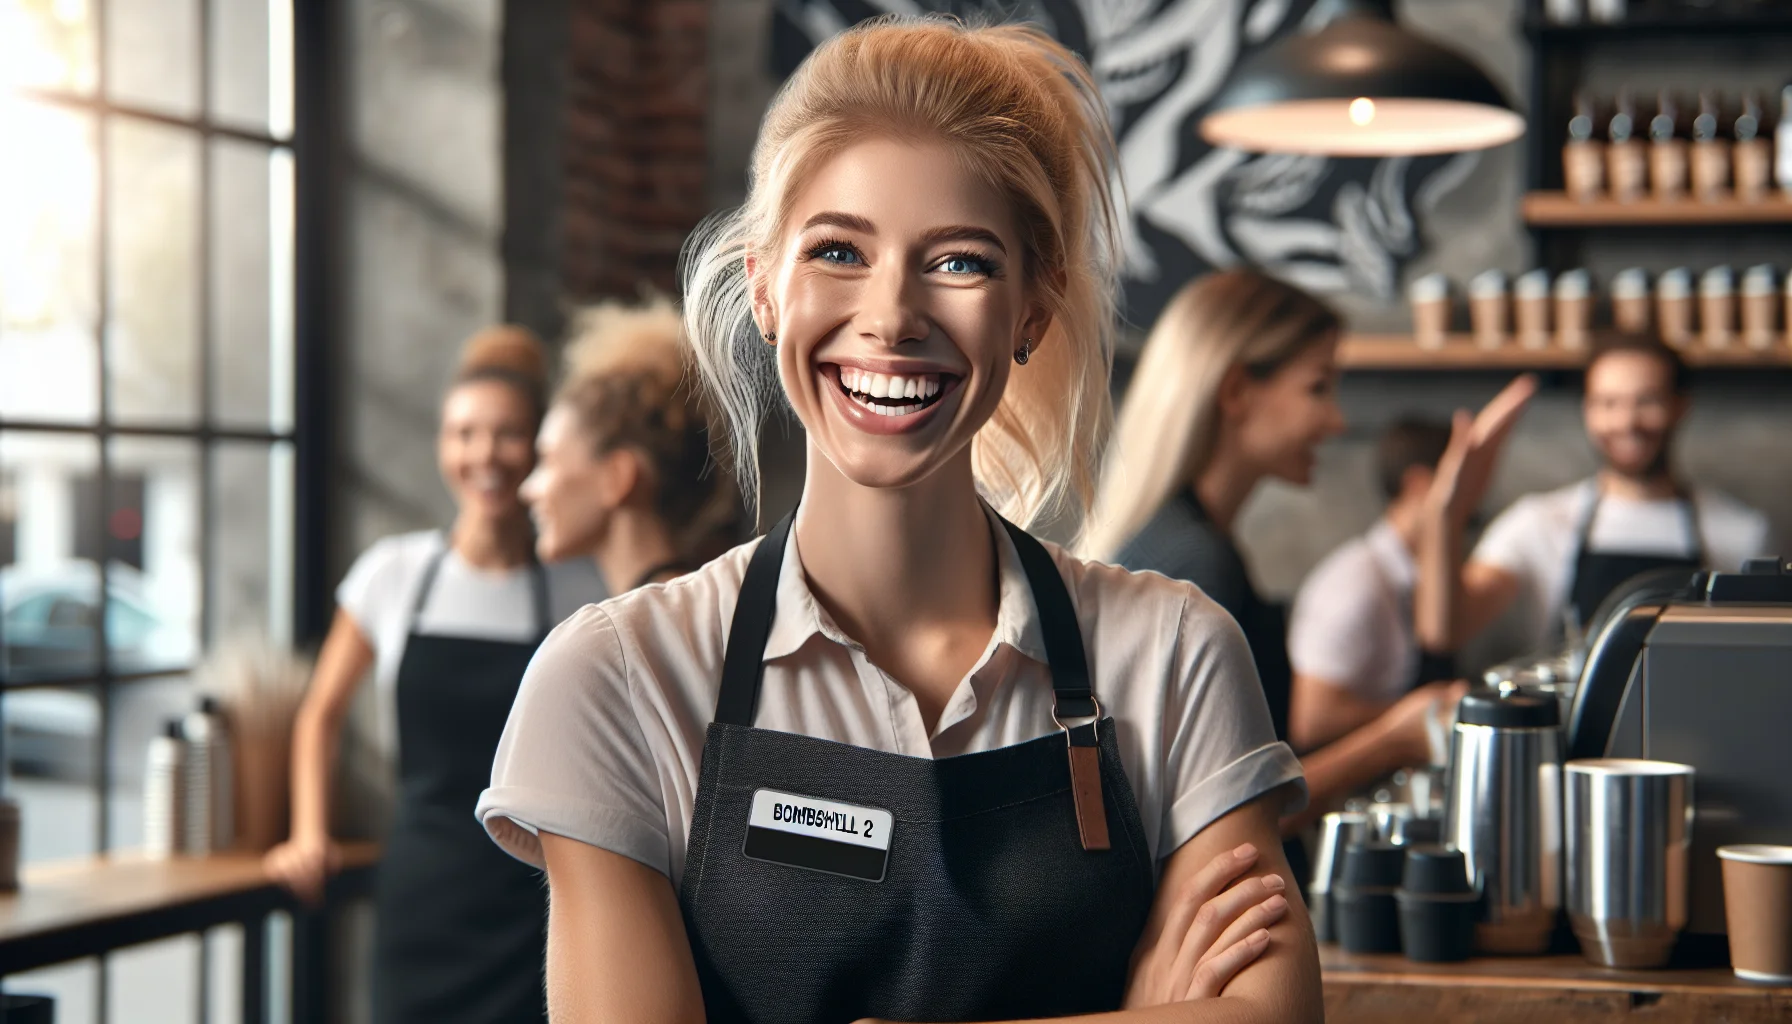 Create a realistic image of a charismatic, blonde-haired Caucasian female barista. She's in a humorous situation at a bustling coffee shop, cleverly engaging her clientele with a winning smile and a playful sense of humor, advertising the delicious coffee. She wears a black apron, her hair tied back in a neat ponytail, and a name tag that reads 'Bombshell 2'. Her light-hearted antics, combined with the inviting scent of fresh brewed coffee, enrapture all who enter the café.